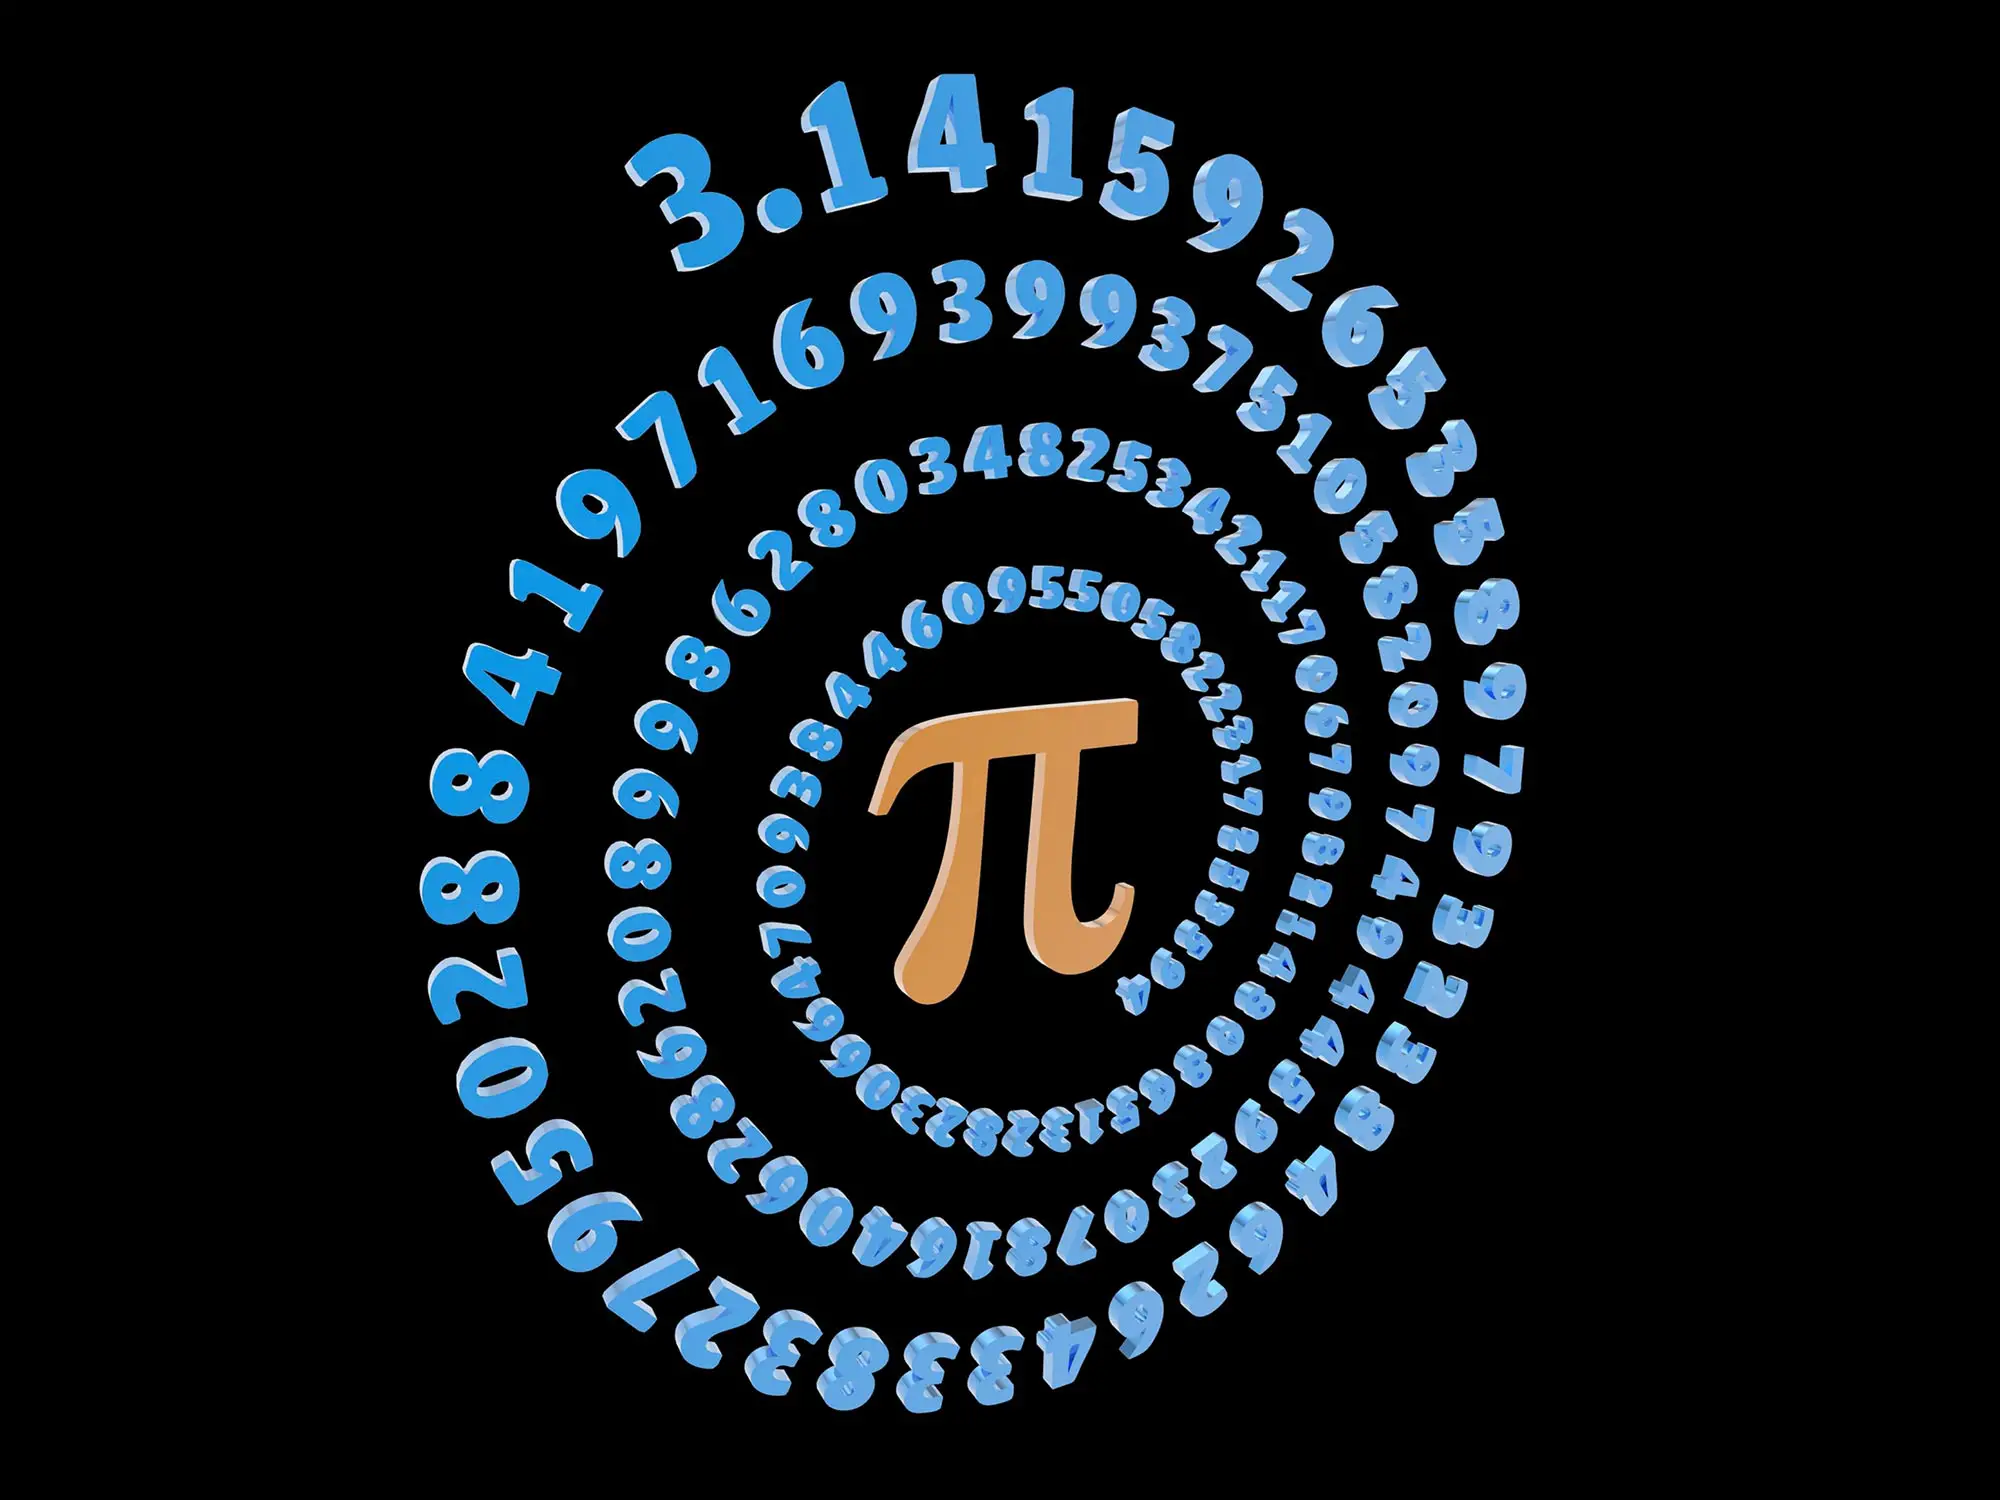   Pi DAY: MARCH 14